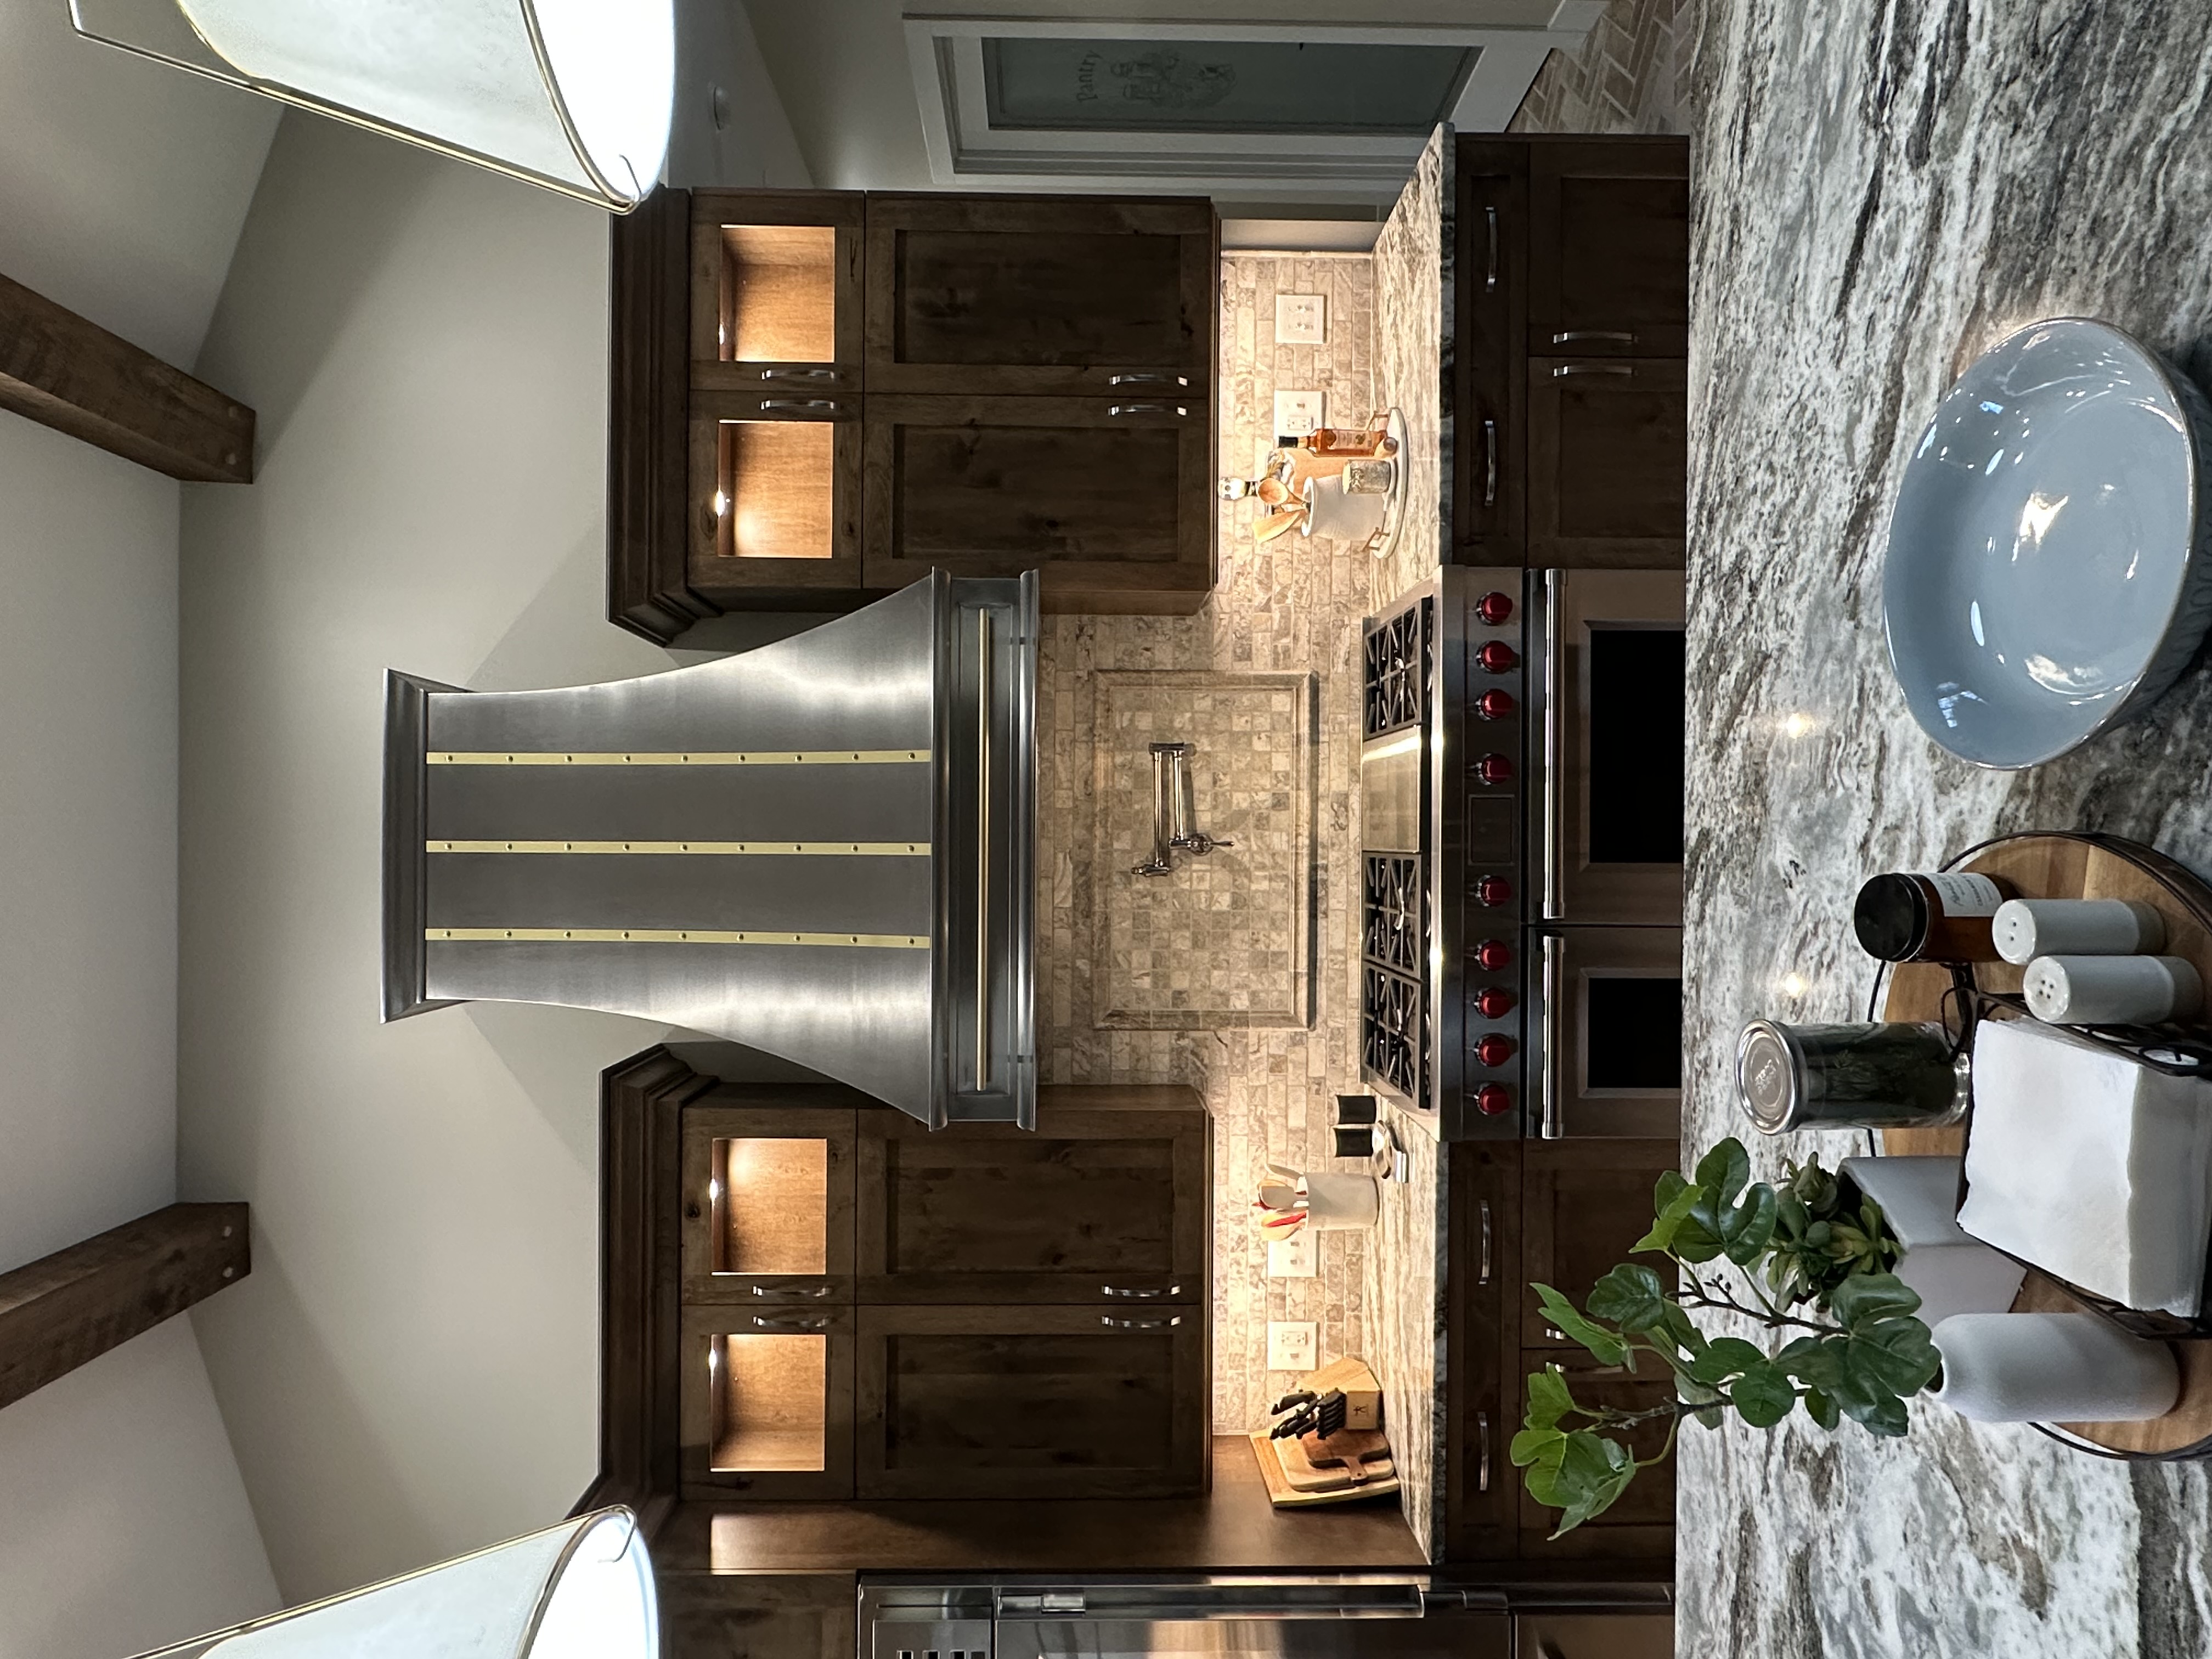 Beautiful range hood french kitchen design, accentuated by rich brown kitchen cabinets, marble kitchen countertops, and marble backsplash